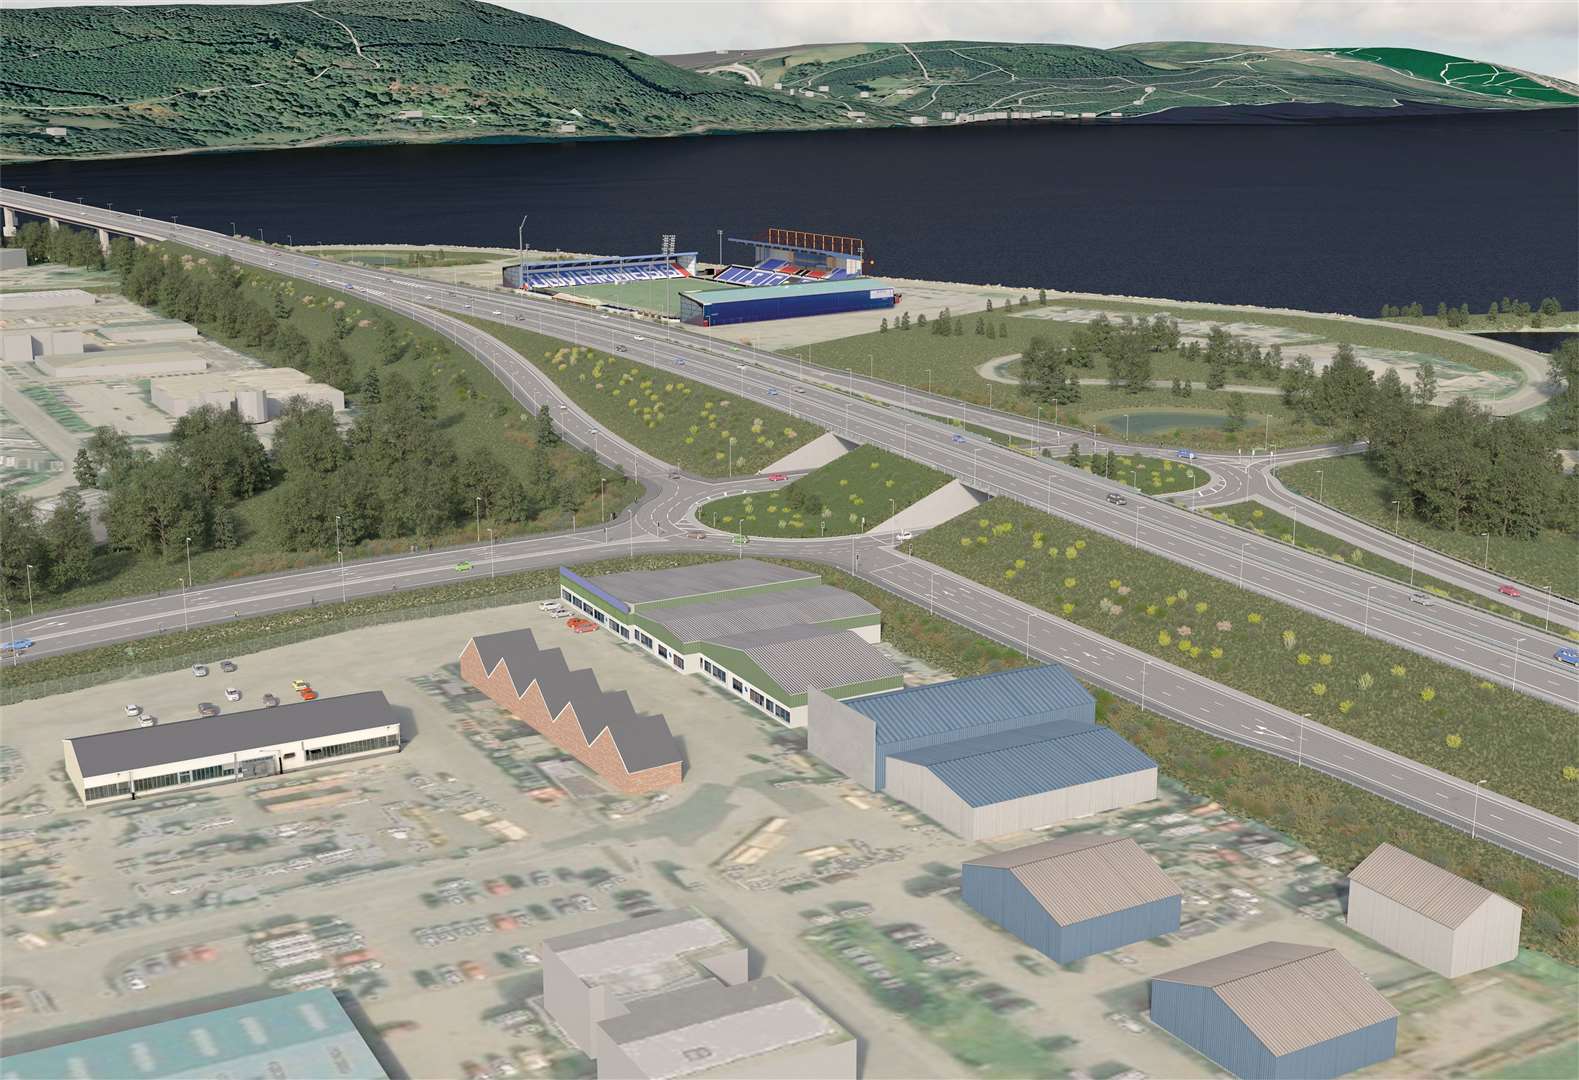 An artist's impression of what the Longman junction could look like.